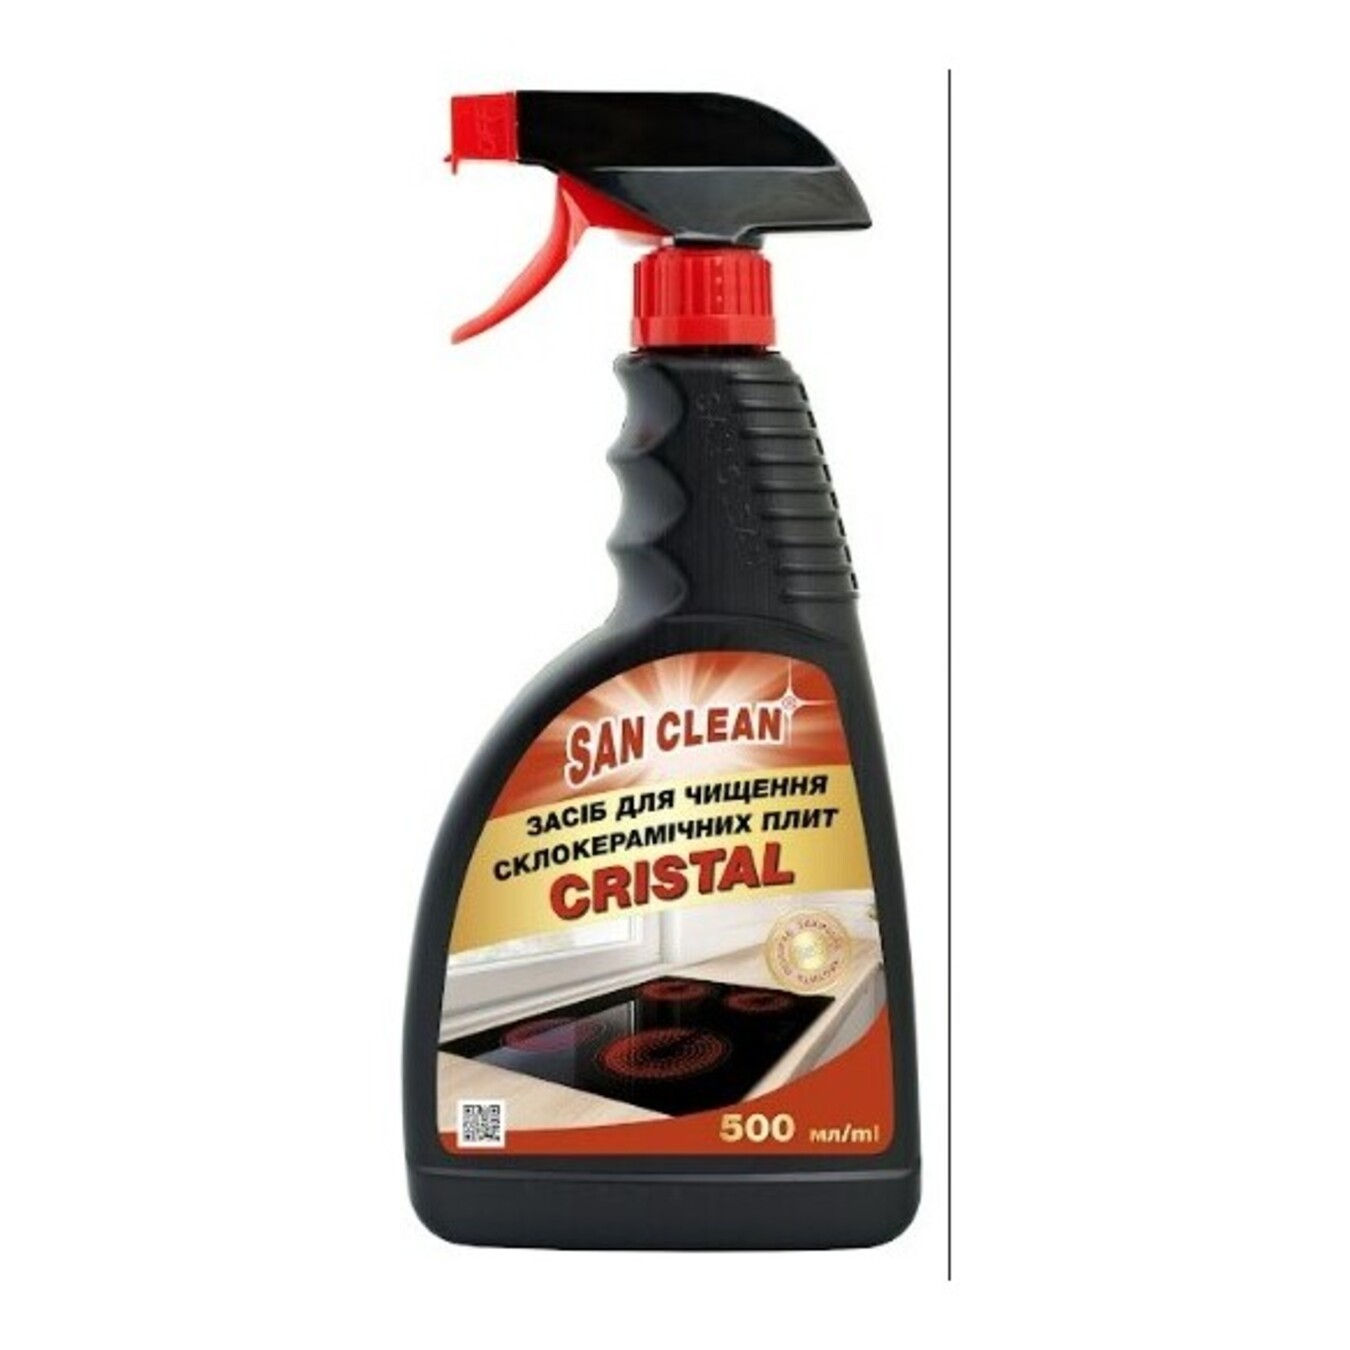 San Clean means for cleaning glass-ceramic surfaces with a sprayer 0.5 l